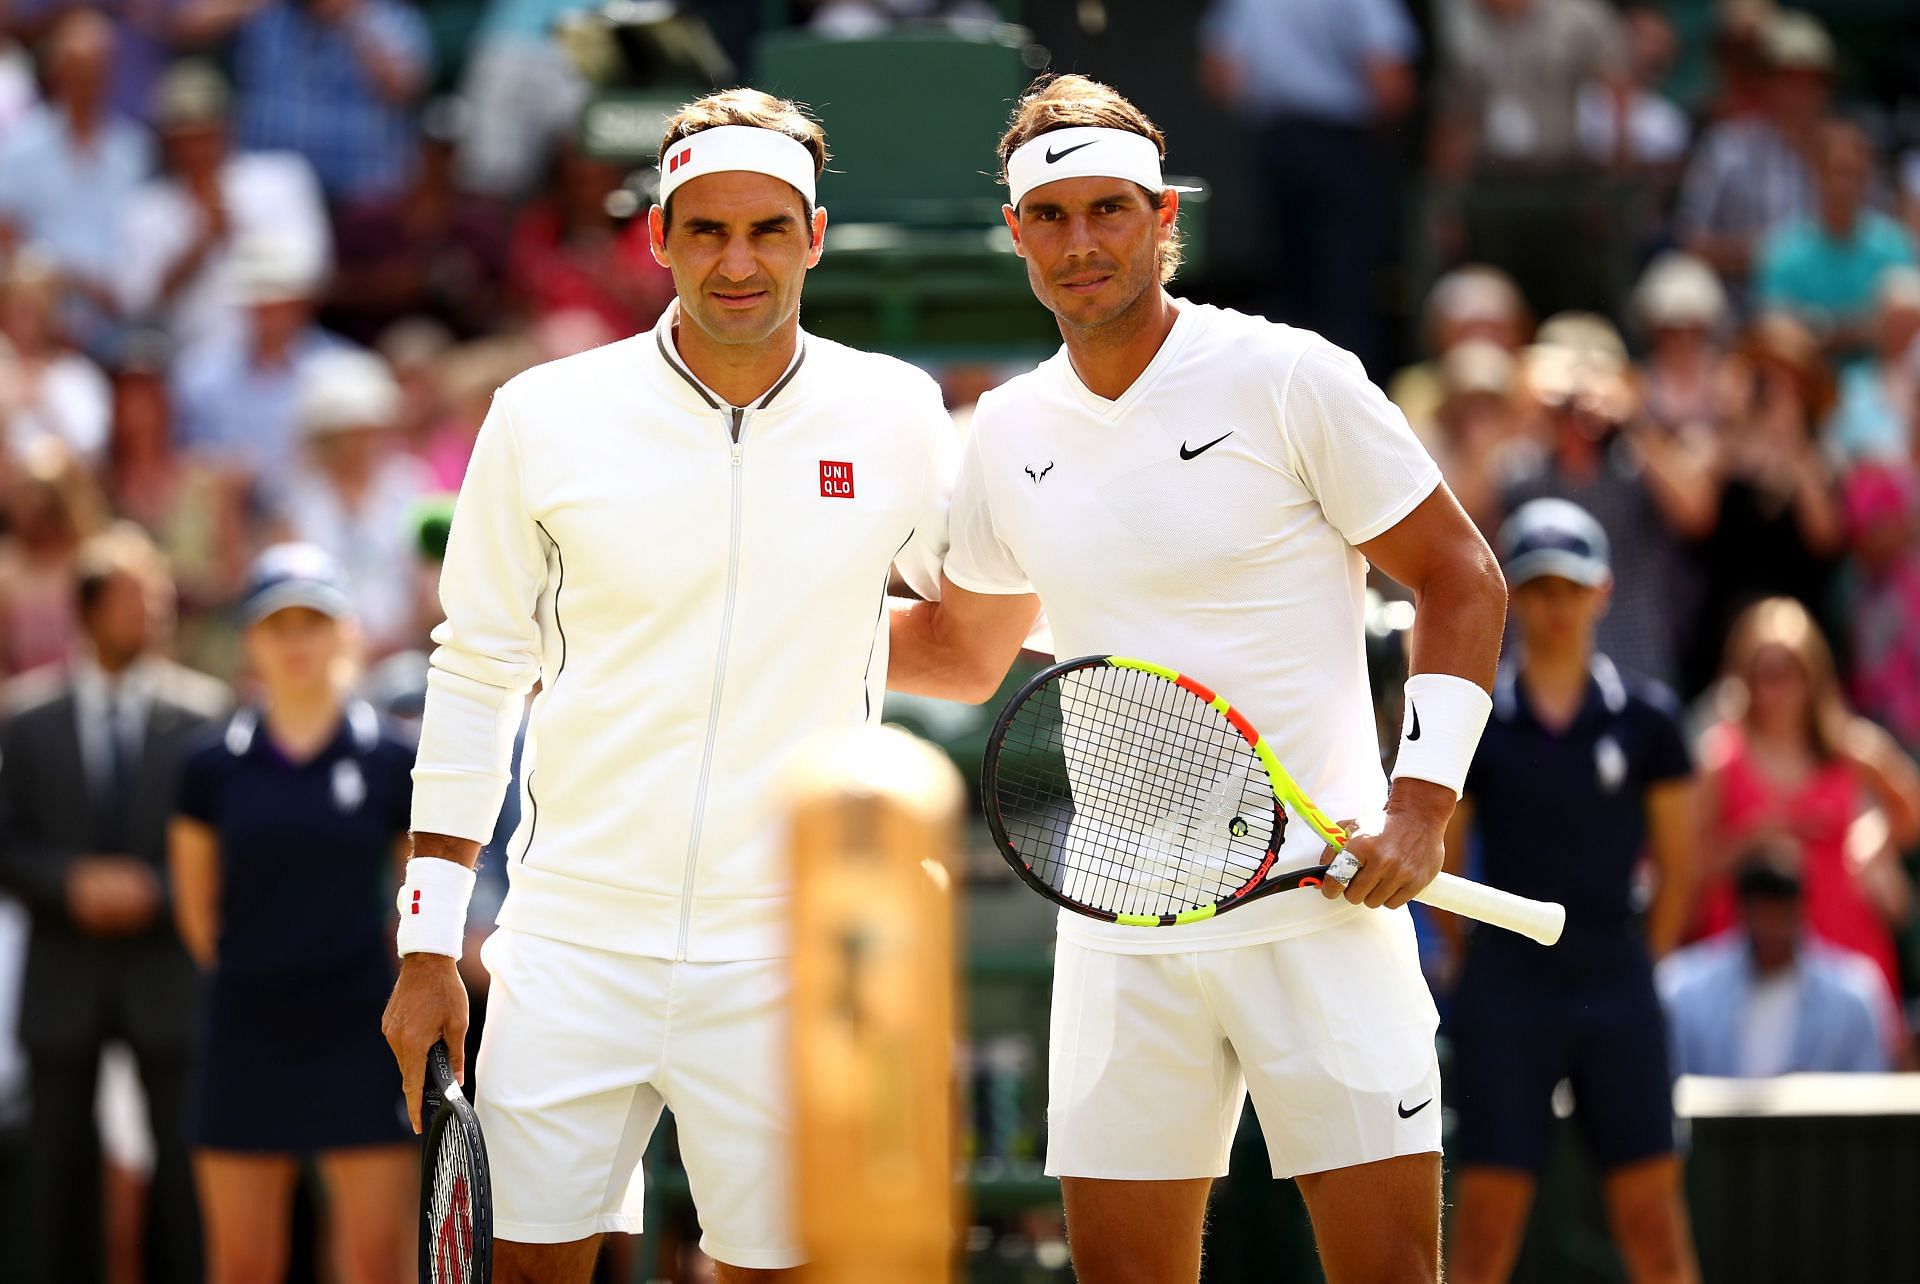 The Swiss and the Spaniard ahead of their Wimbledon 2019 clash